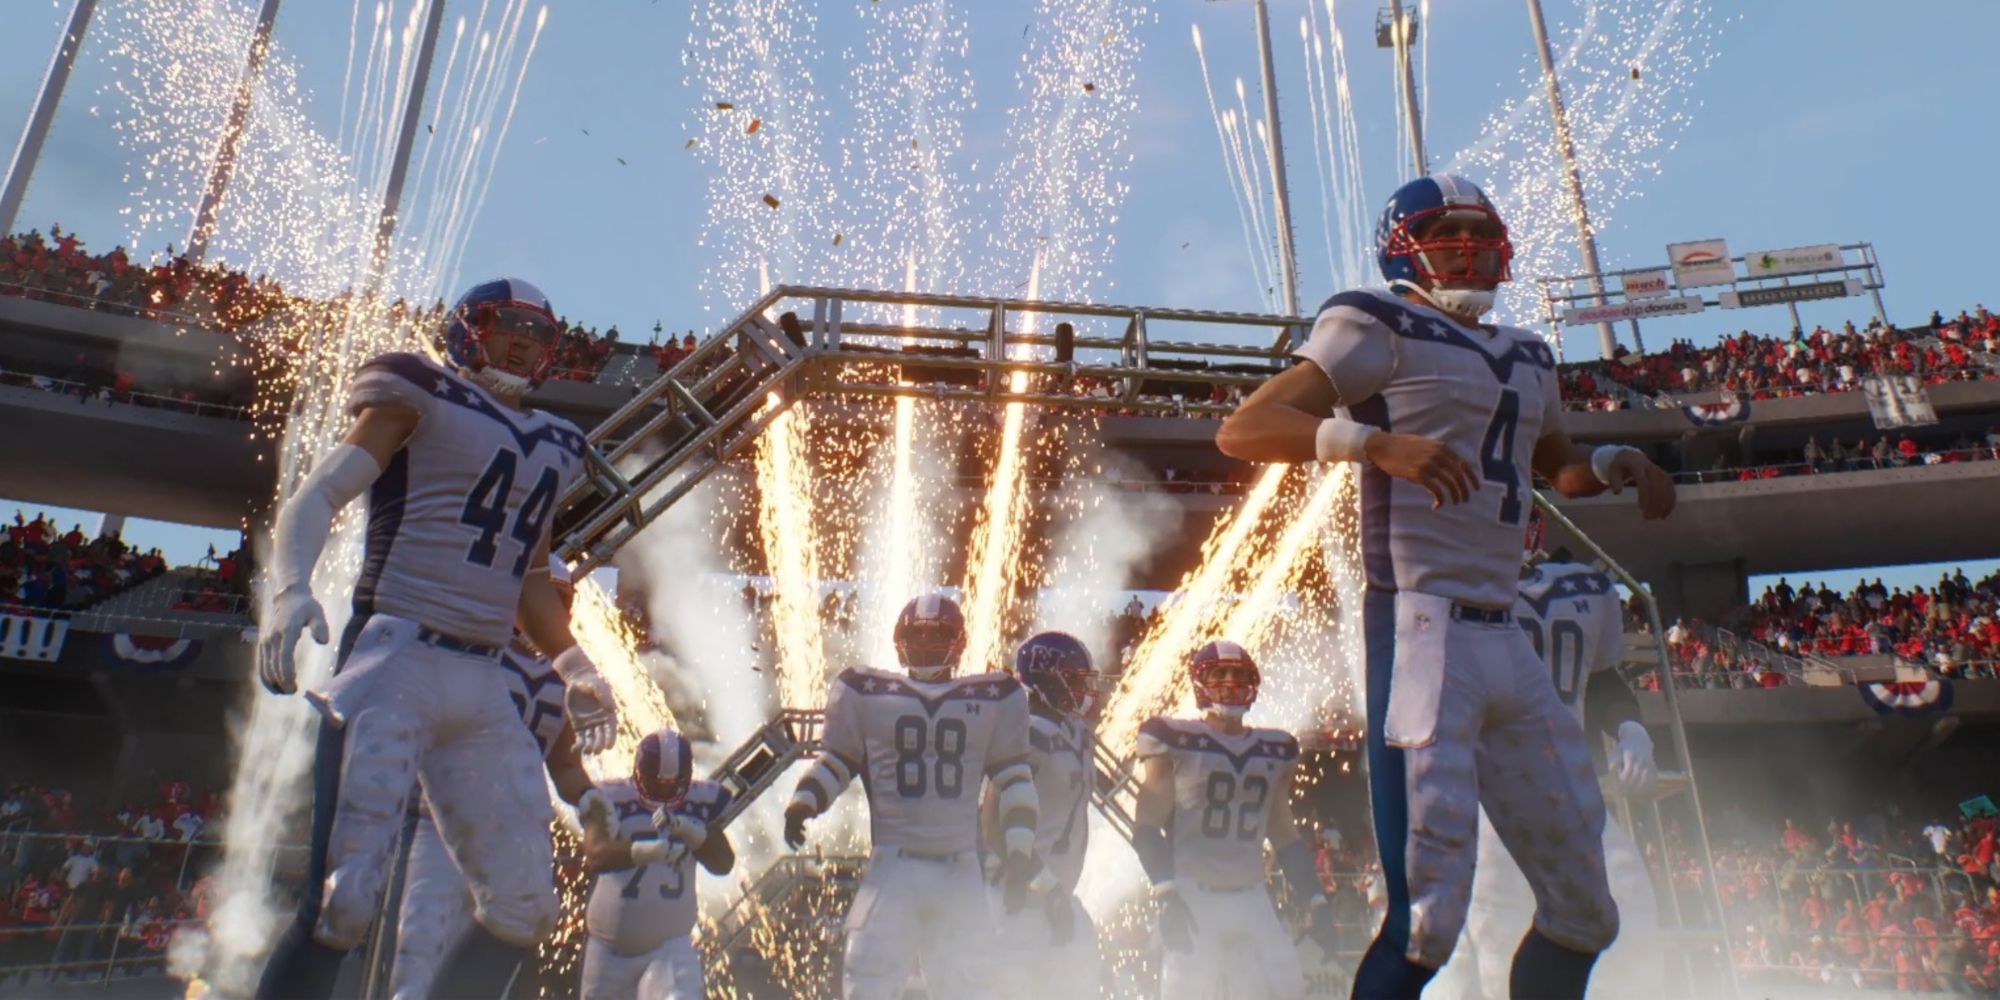 Madden NFL 23 players going through pyrotechnics